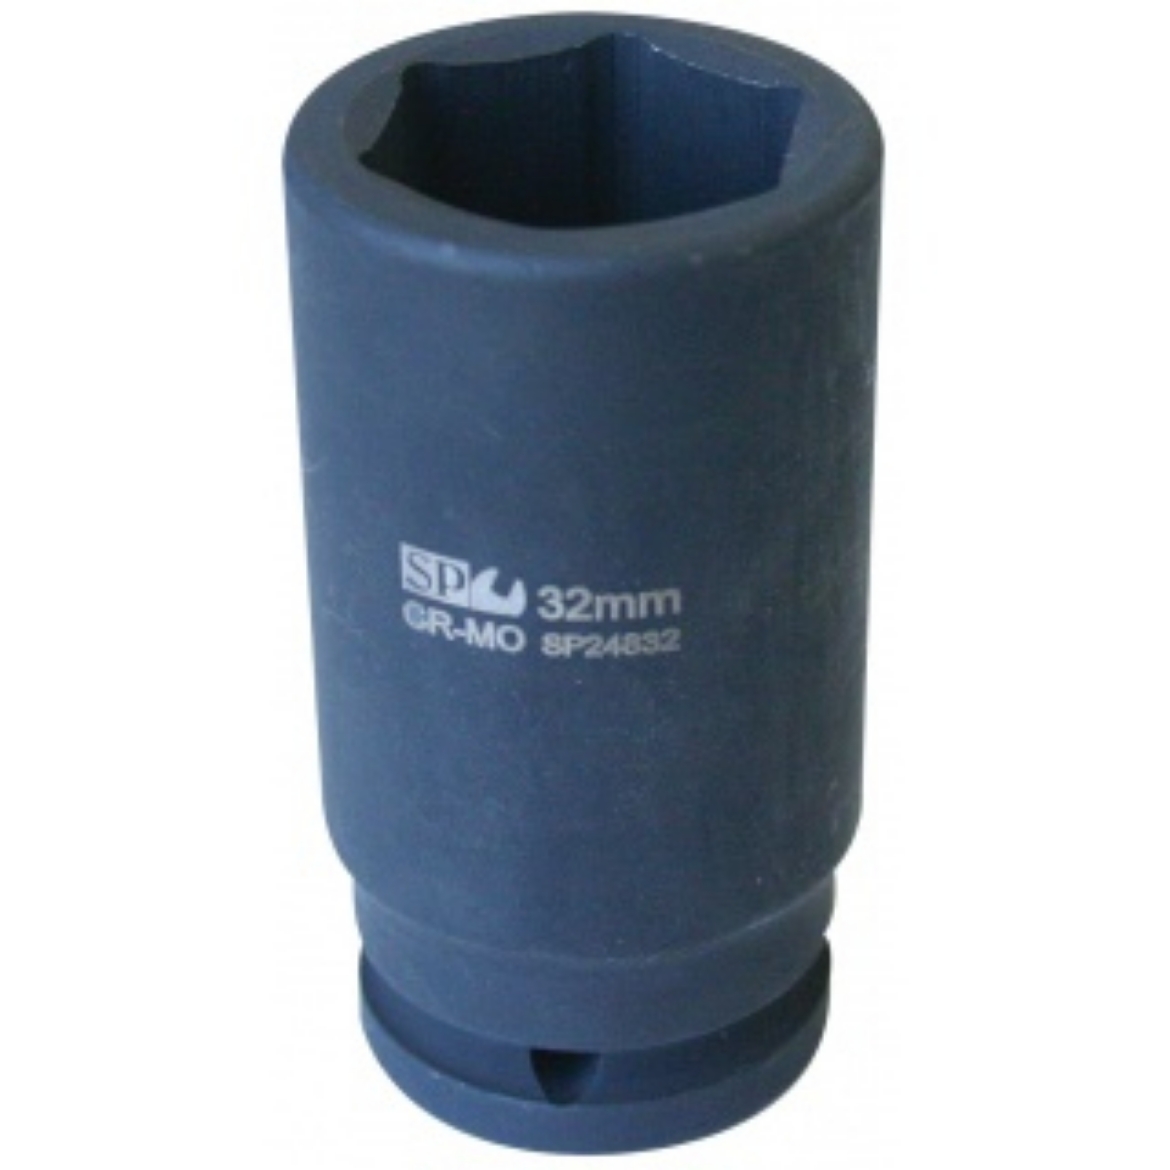 Picture of SOCKET IMPACT 3/4 DR 6PT DEEP METRIC 17MM SP TOOLS